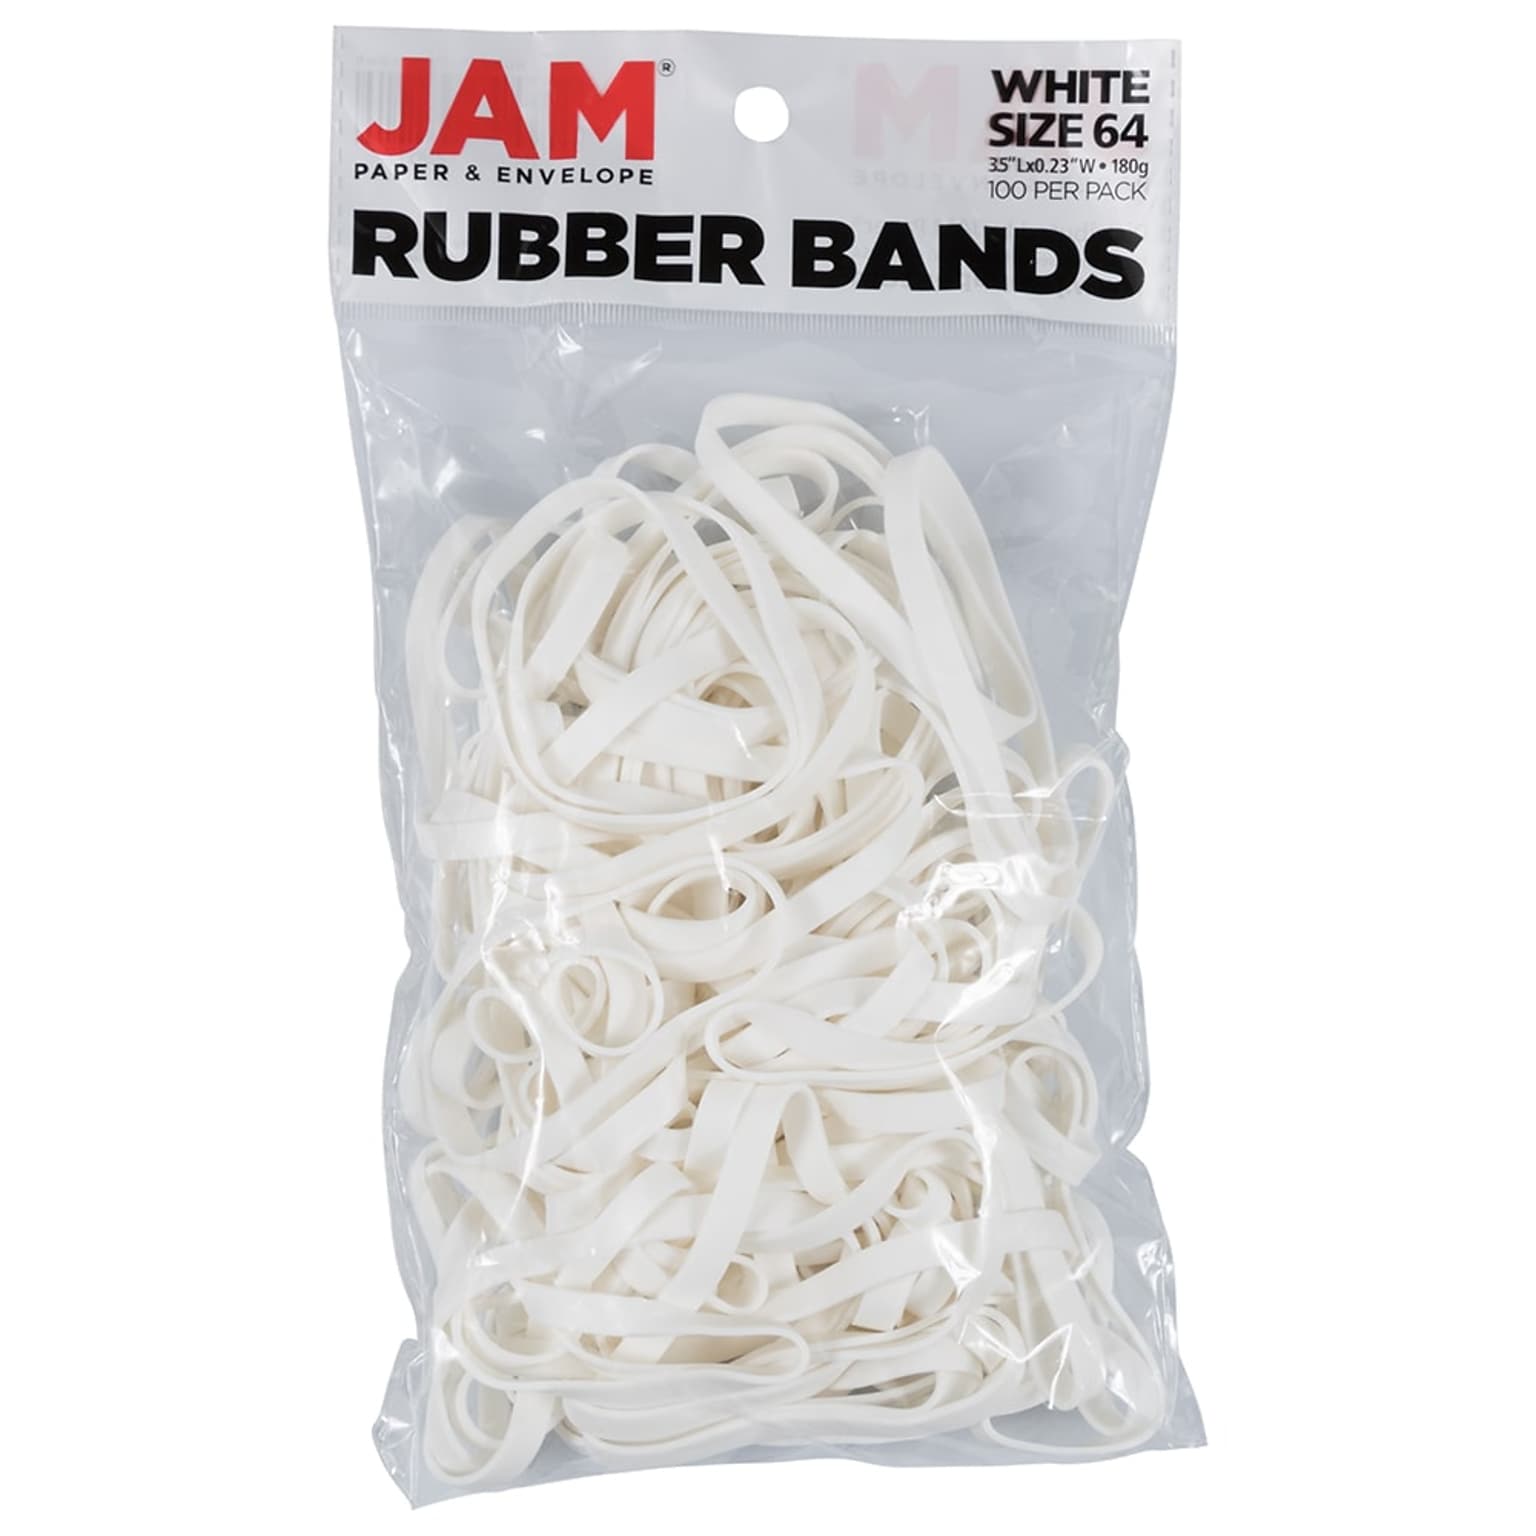 JAM Paper Colored Multi-Purpose #64 Rubber Bands, 3.5 x 0.25, Latex Free, White, 100/Pack (33364RBWH)